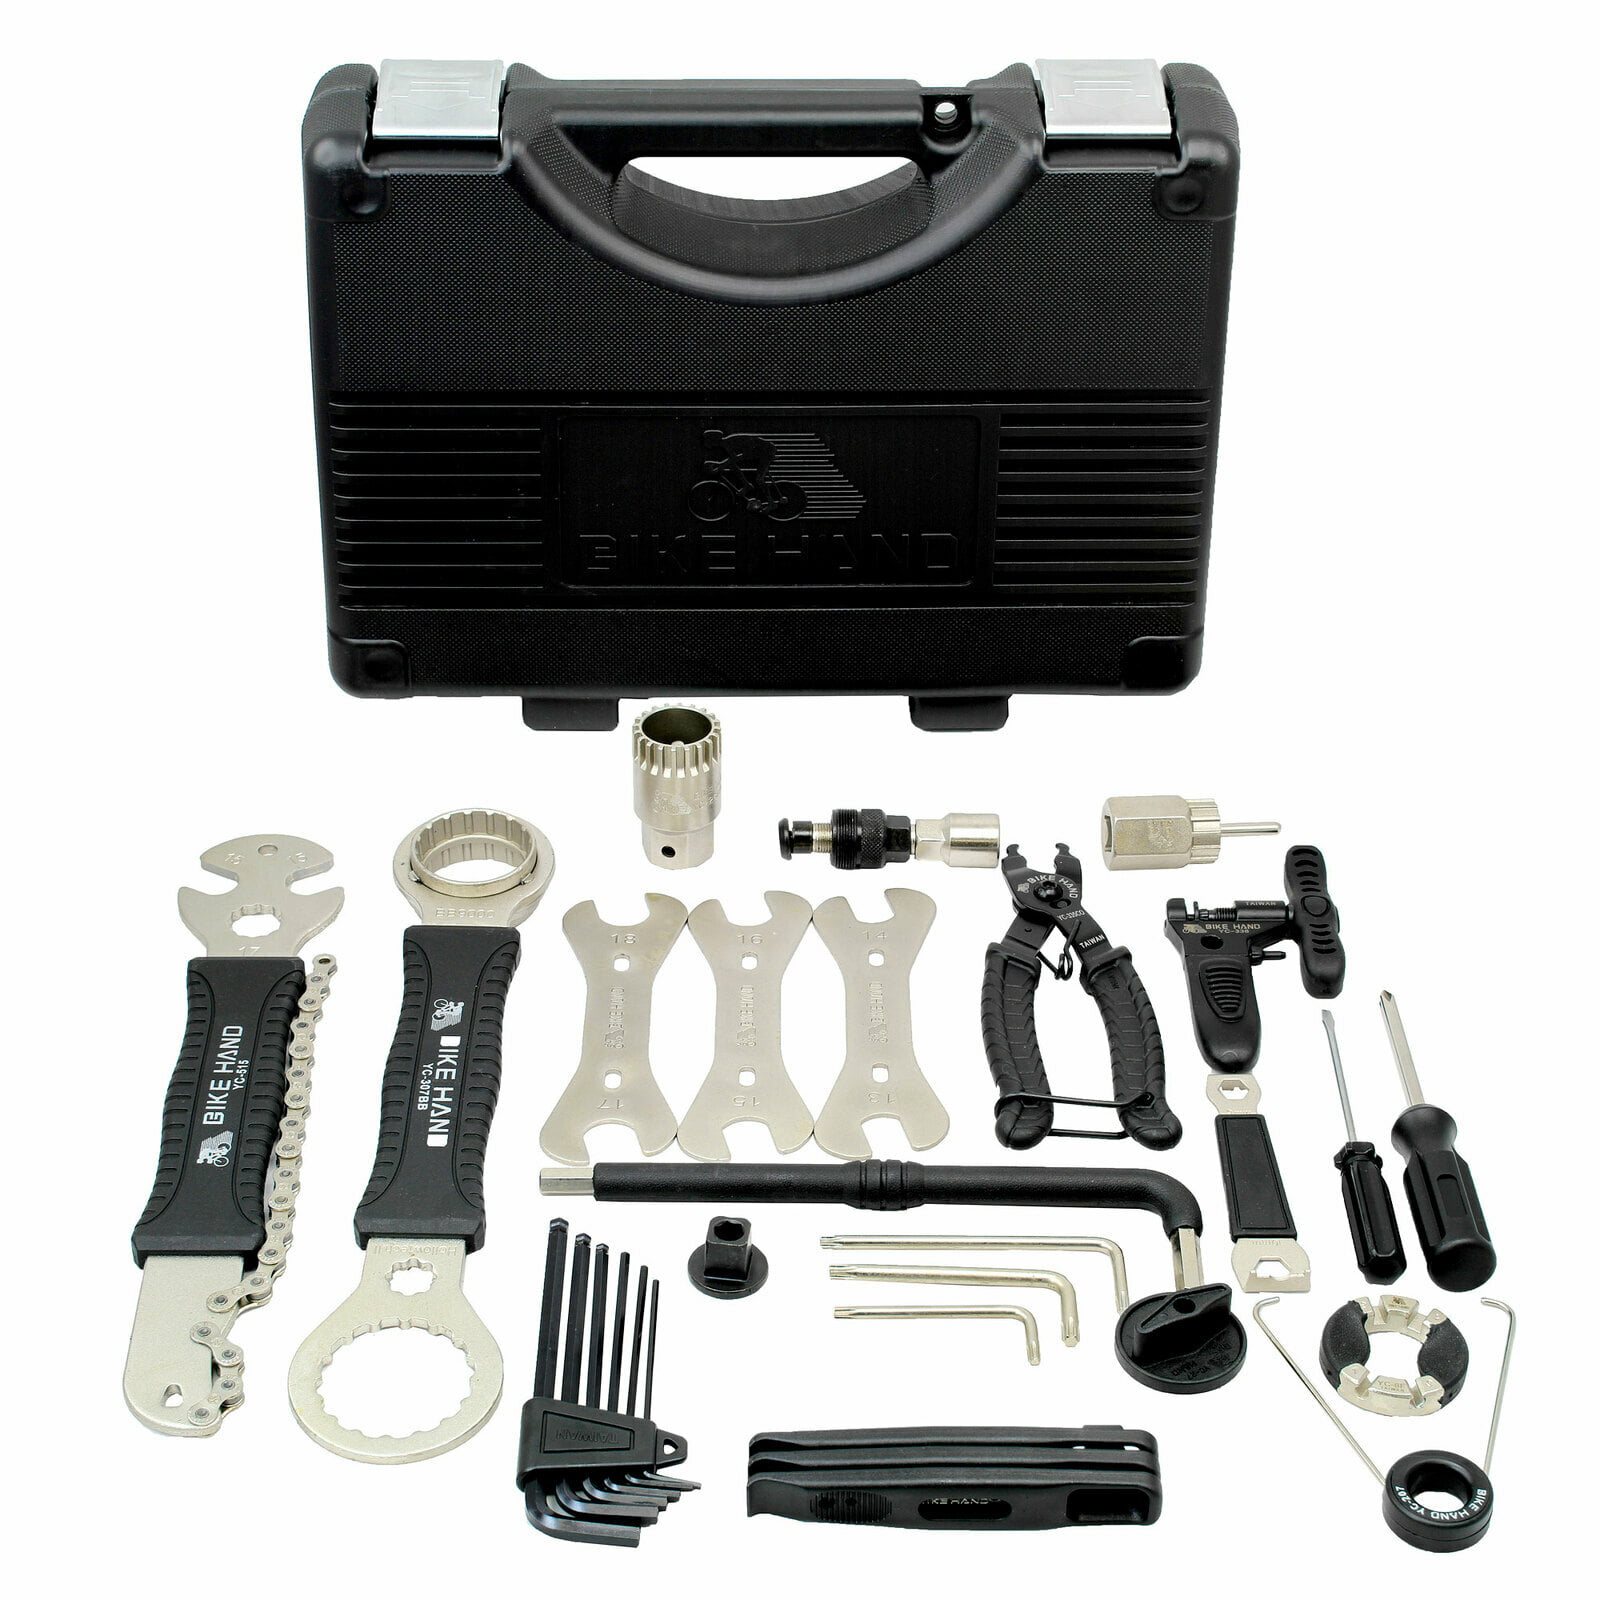 Details about   Venzo Bike Bicycle Repair Tool Kit Quality Tools Kit Set for Mountain Bike ... 